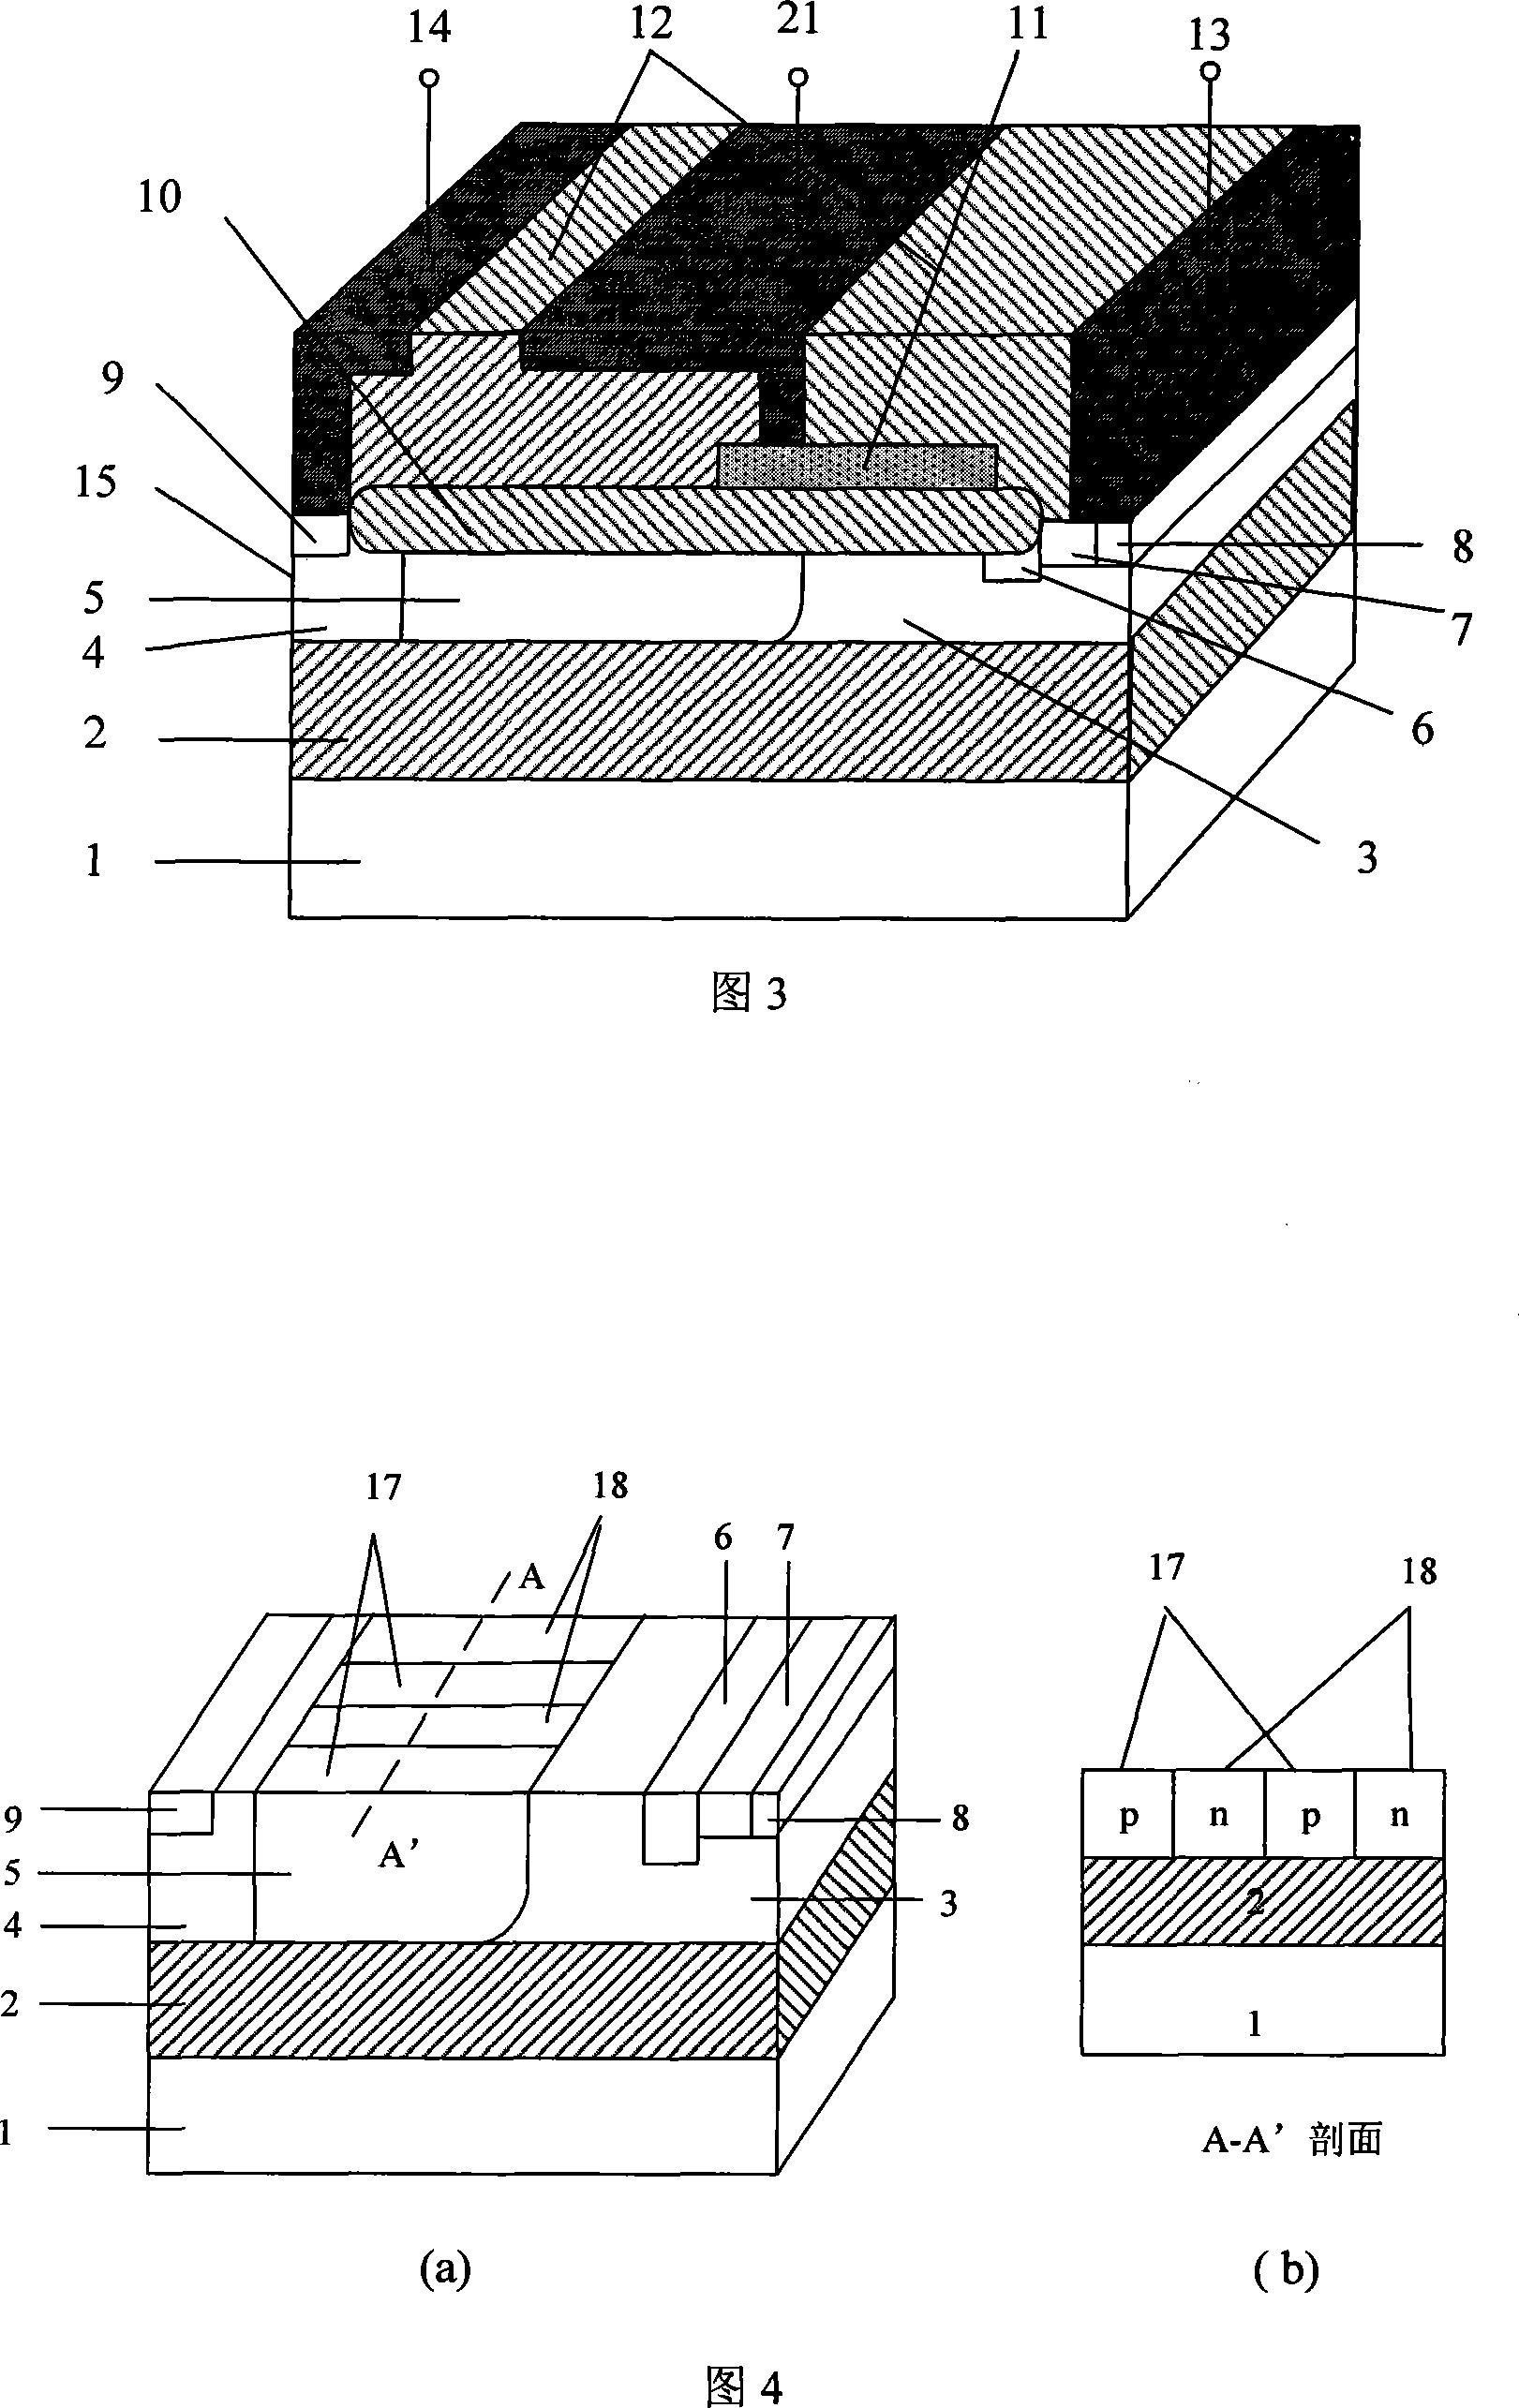 Thin film SOI thick grid oxygen power device with grid field plate